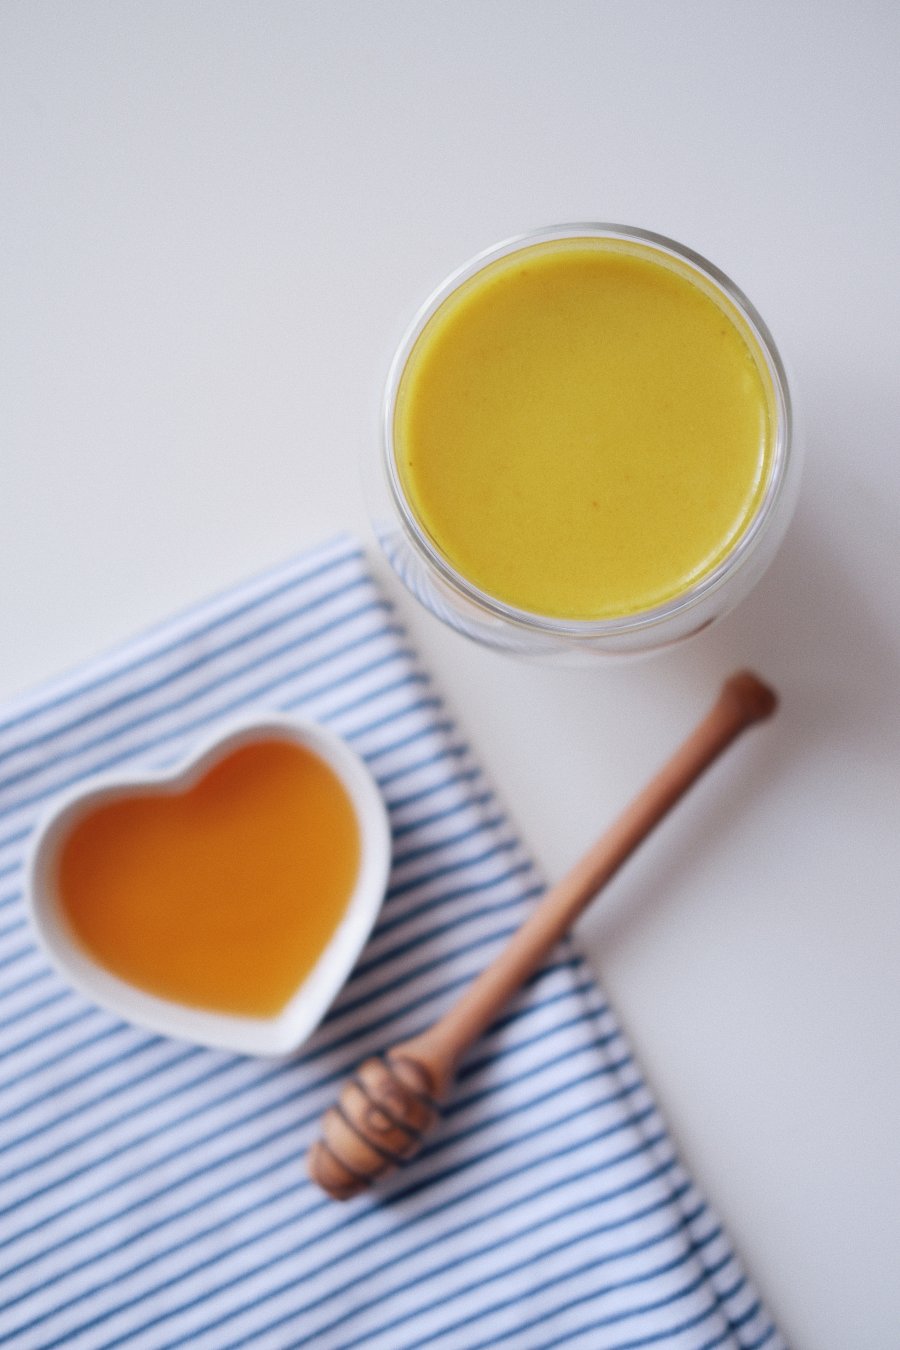 A glass containing turmeric golden milk, nearby a heart shaped dish containing honey